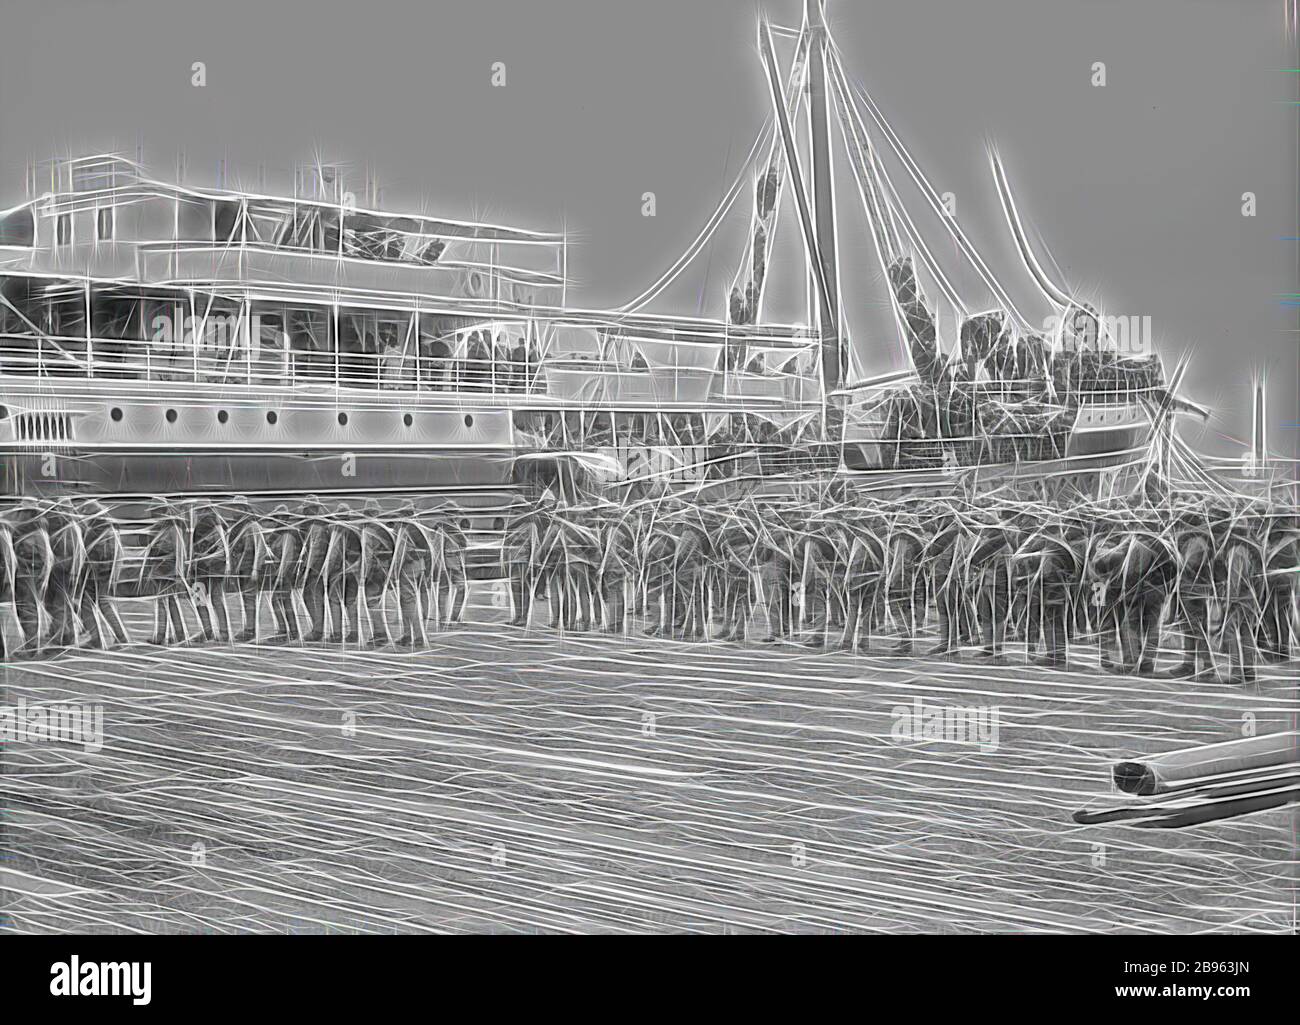 Glass Negative - Troops Embarking HMT Orient Bound for Boer War, Melbourne,  15 Feb 1901, Troops embarking a ship in Melbourne, bound for the Boer War,  probably on 15 February 1901. The